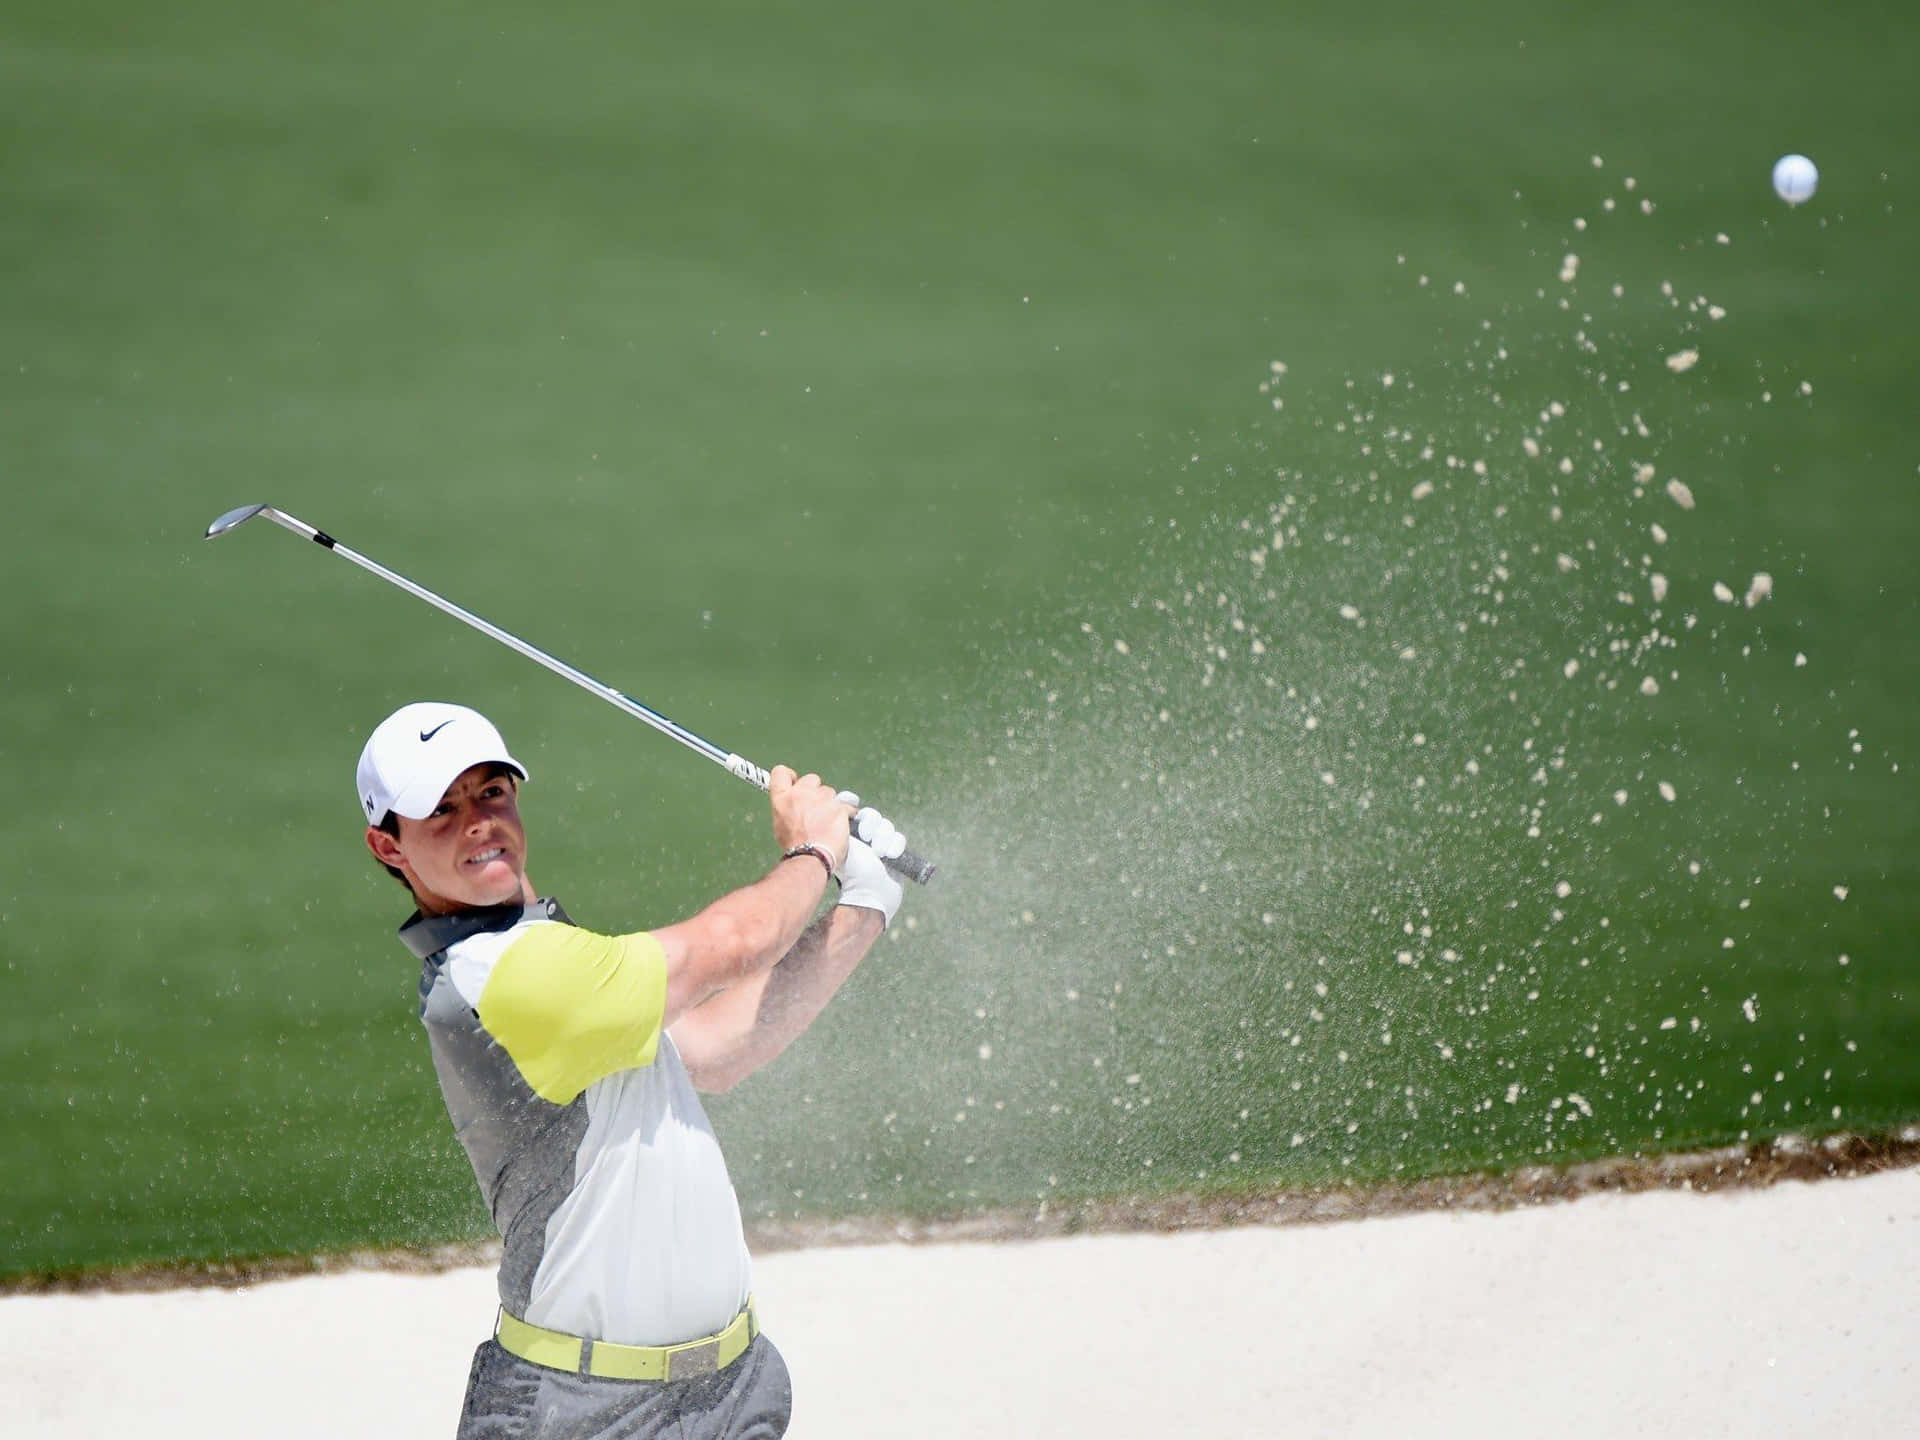 "Chasing Perfection: Rory Mcilroy Prepares for His Next Golf Shot" Wallpaper